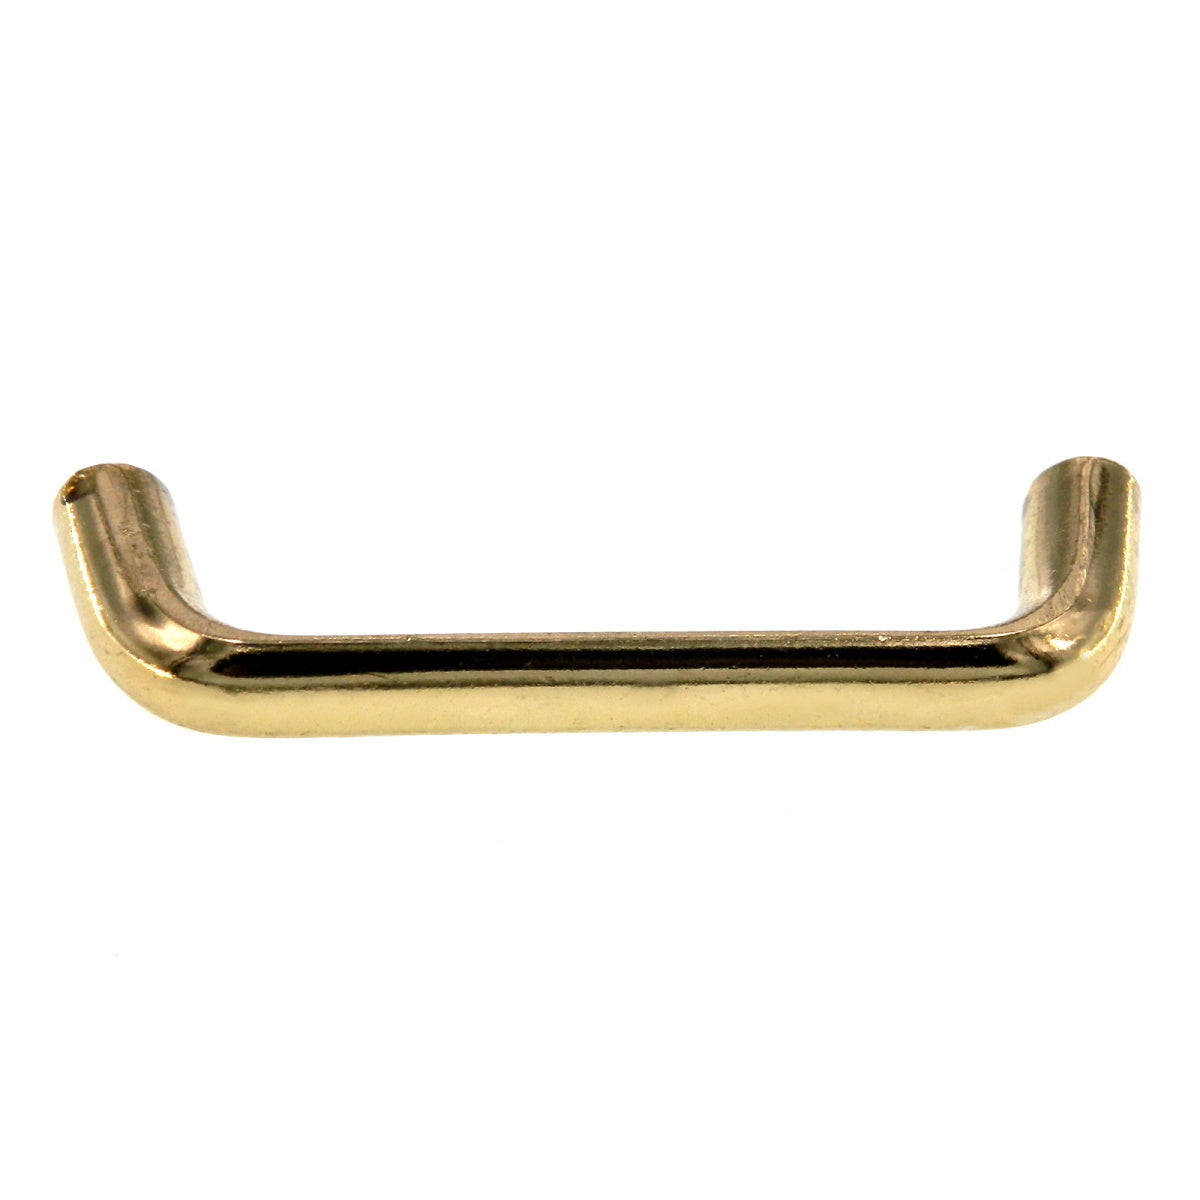 Amerock Contempory 3-1/2" CTC Polished Brass Cabinet Arch Pull Handle BP76206-3